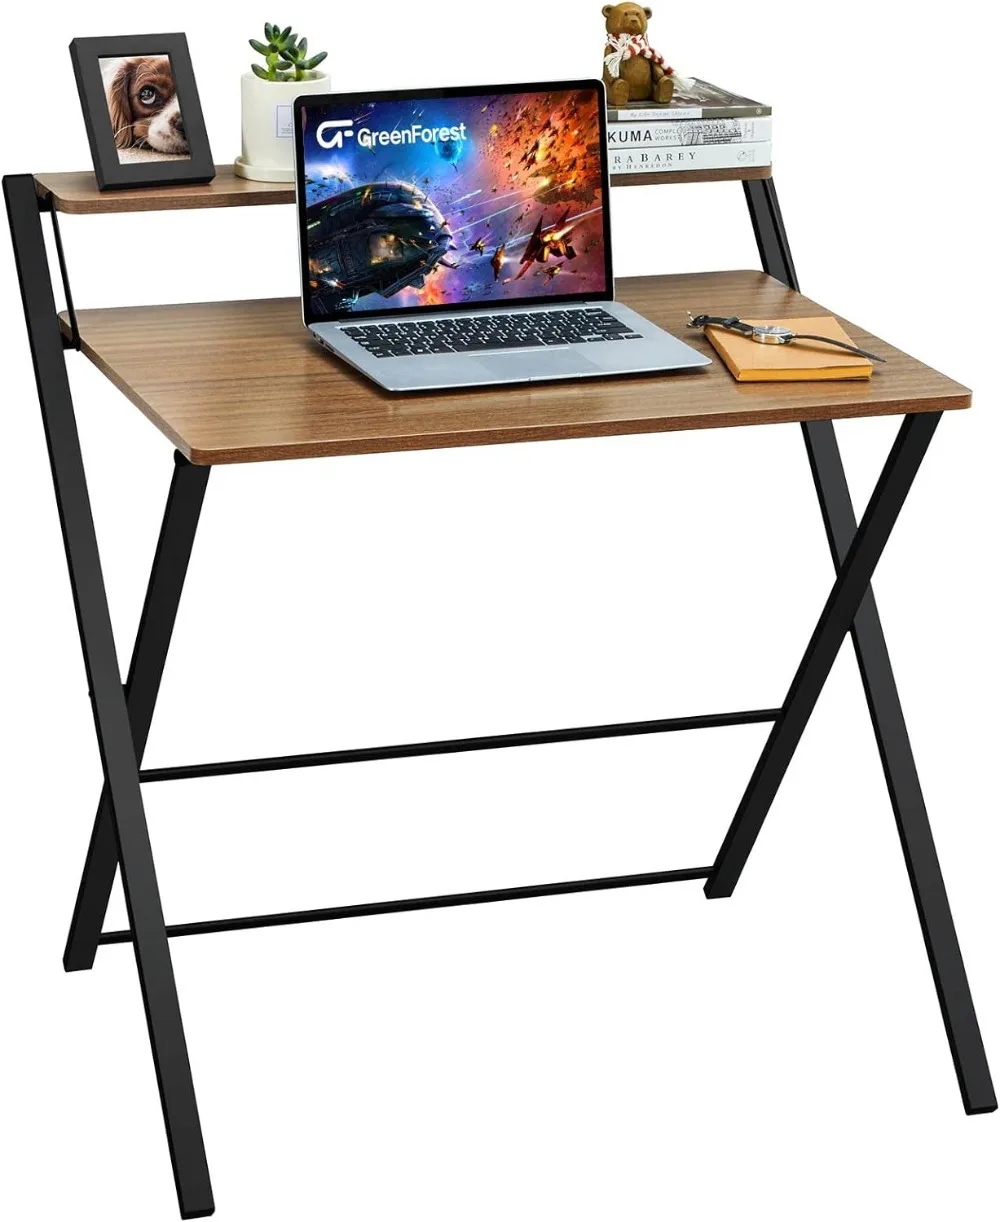 GreenForest Small Folding Desk No Assembly Required, Fully Unfold 27.3 x 22 inch 2-Tier Computer Desk 2017 original a1418 4k glass for imac a1419 21 5 inch 27inch a1316 a1826 a2115 lcd screen assembly replacement